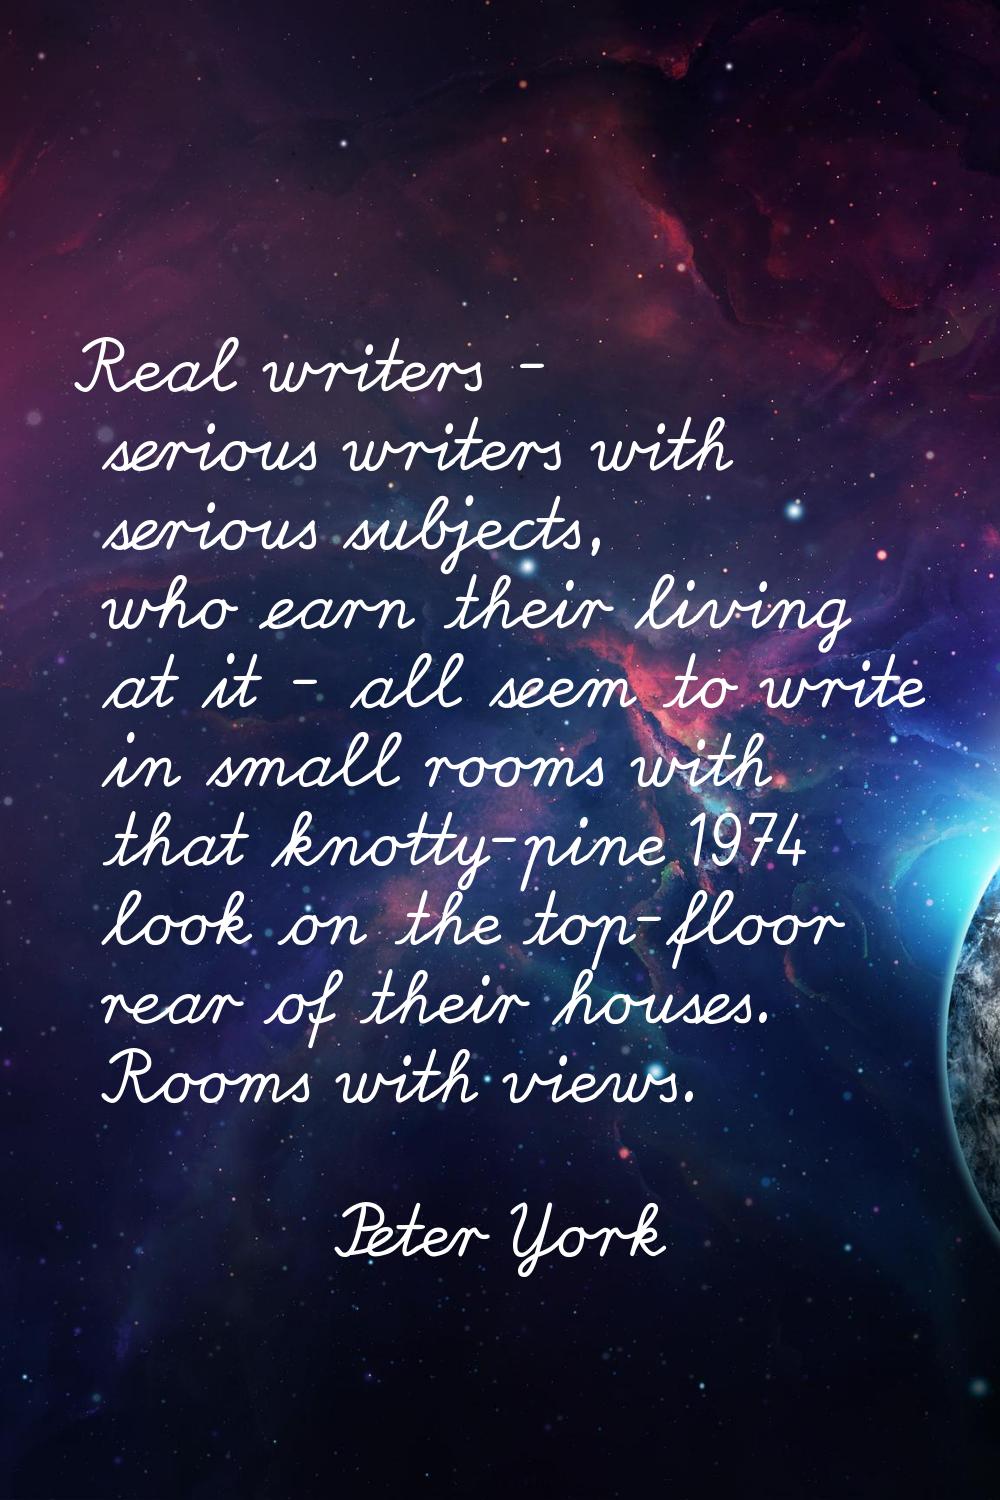 Real writers - serious writers with serious subjects, who earn their living at it - all seem to wri